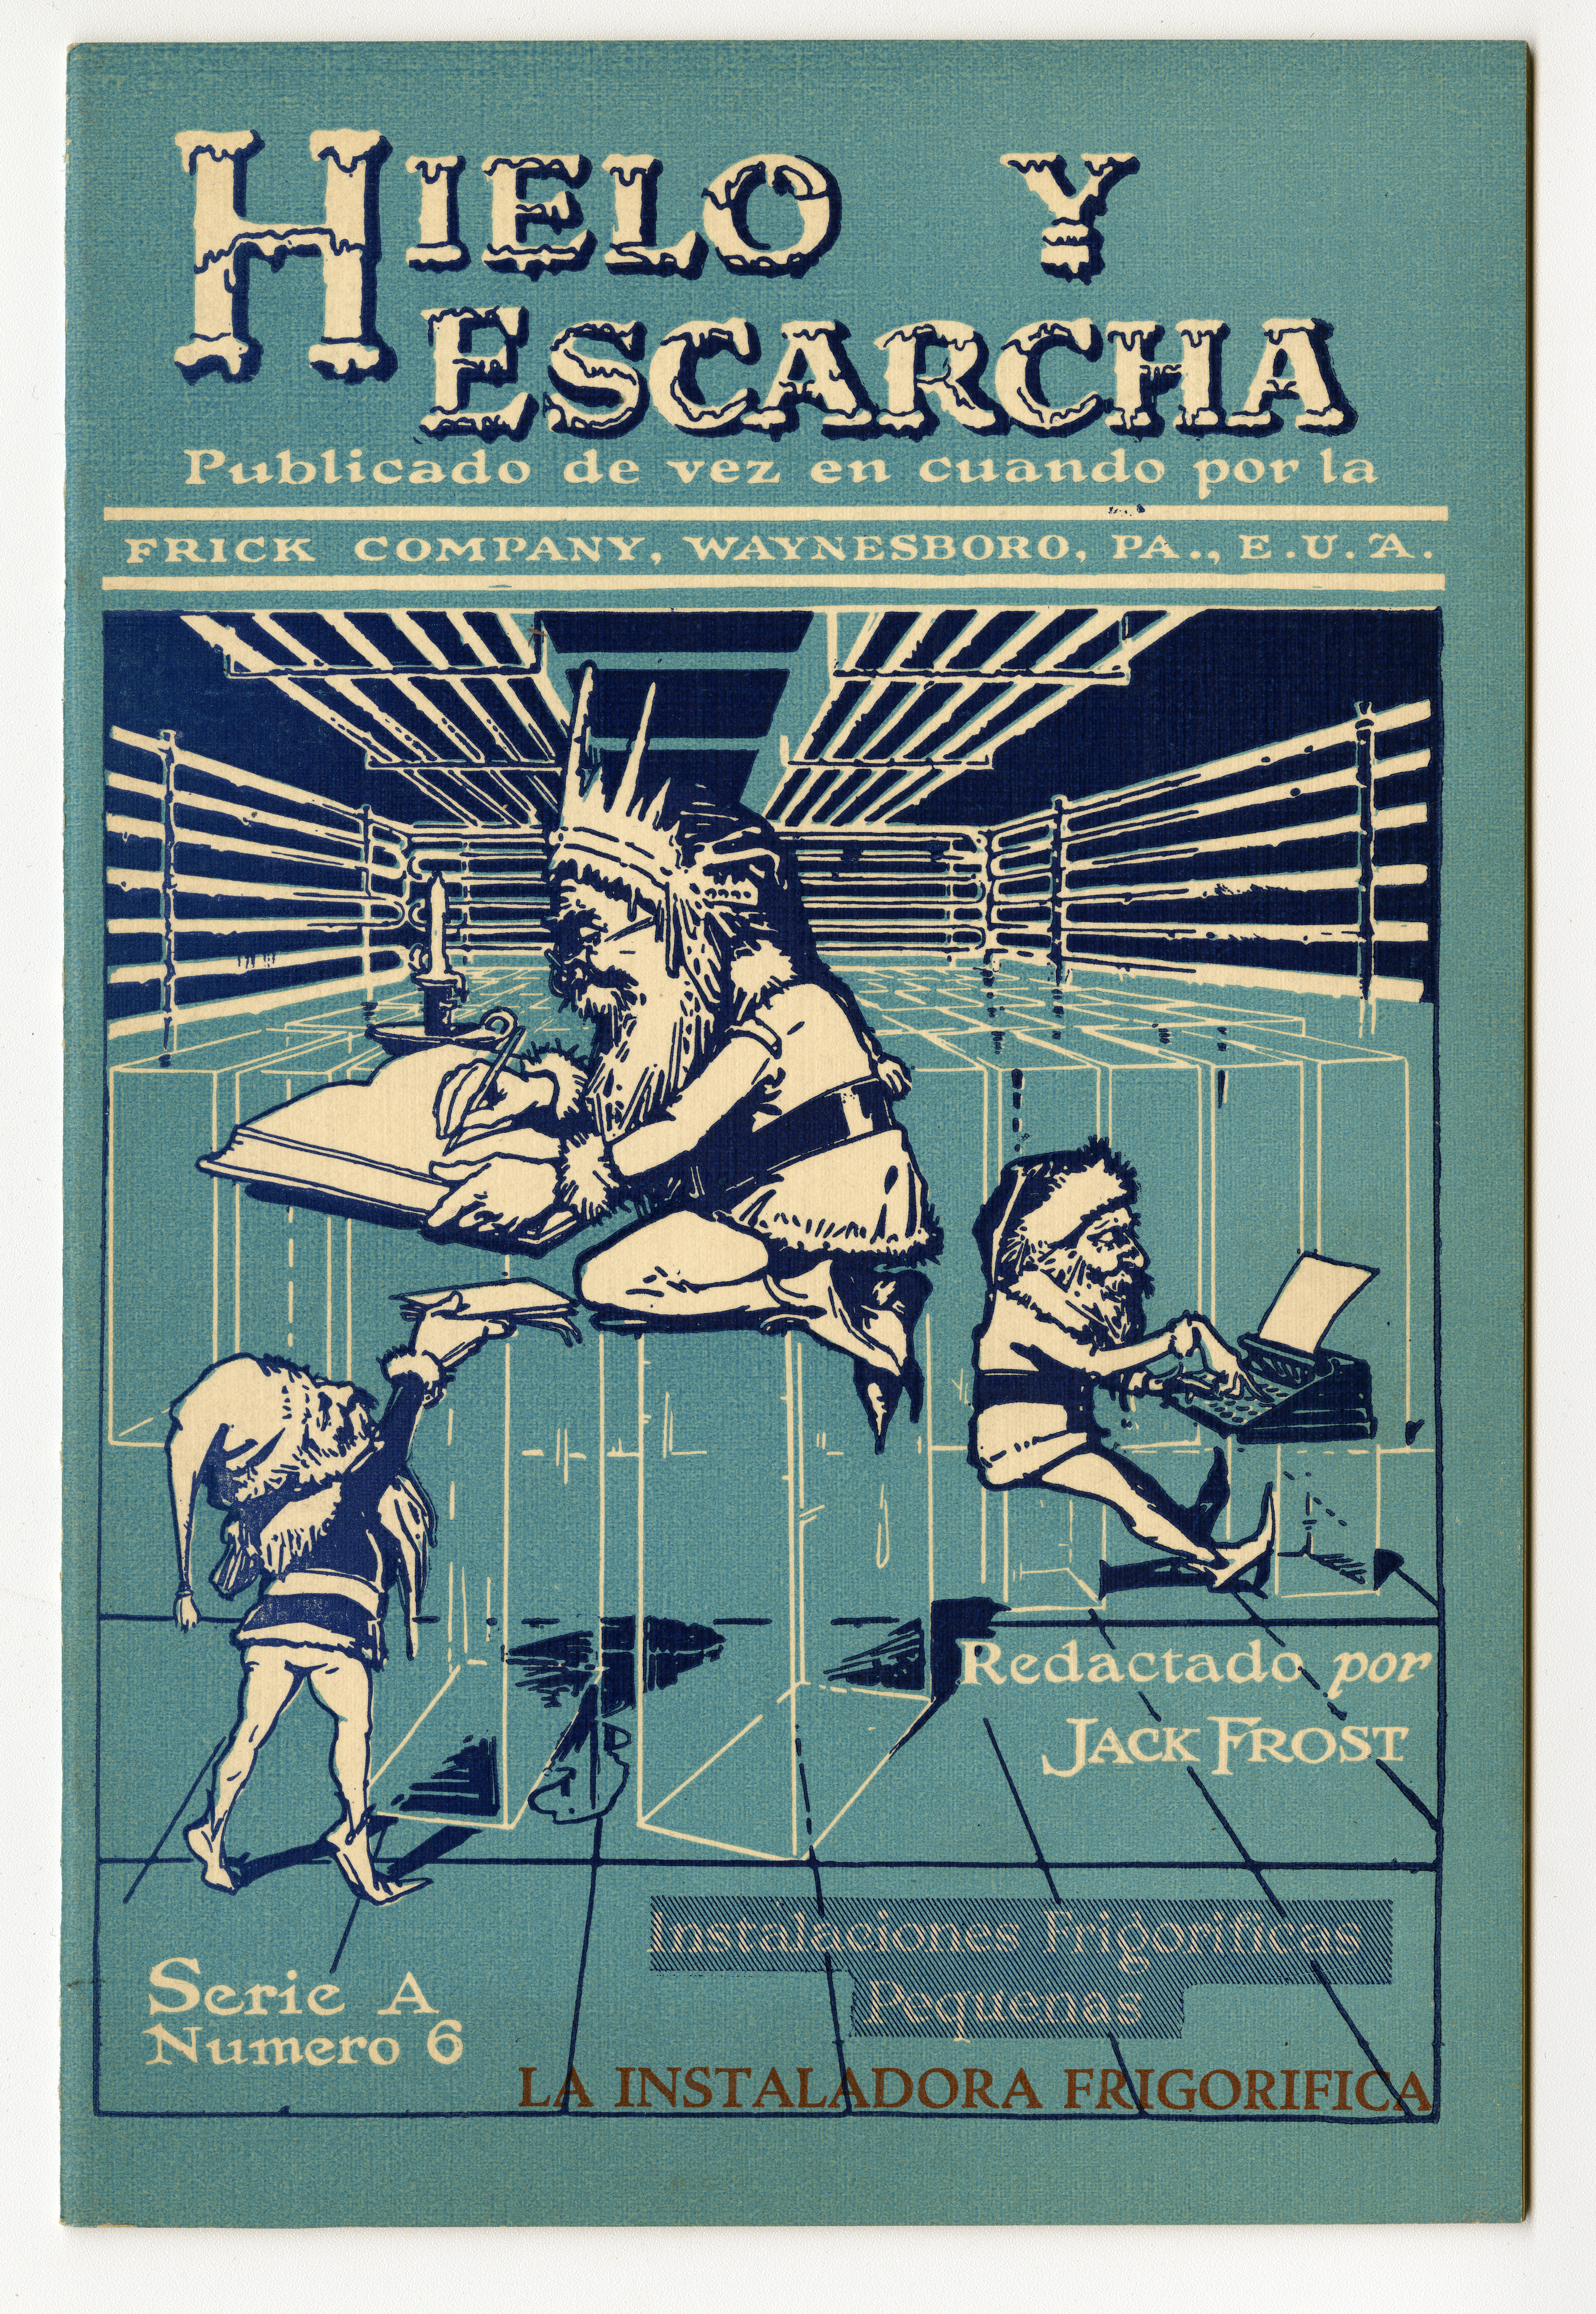 English and Spanish versions of Frick’s product brochure, published “every little while” and edited by “Jack Frost,” circa 1920s. (AC0293-0000016)